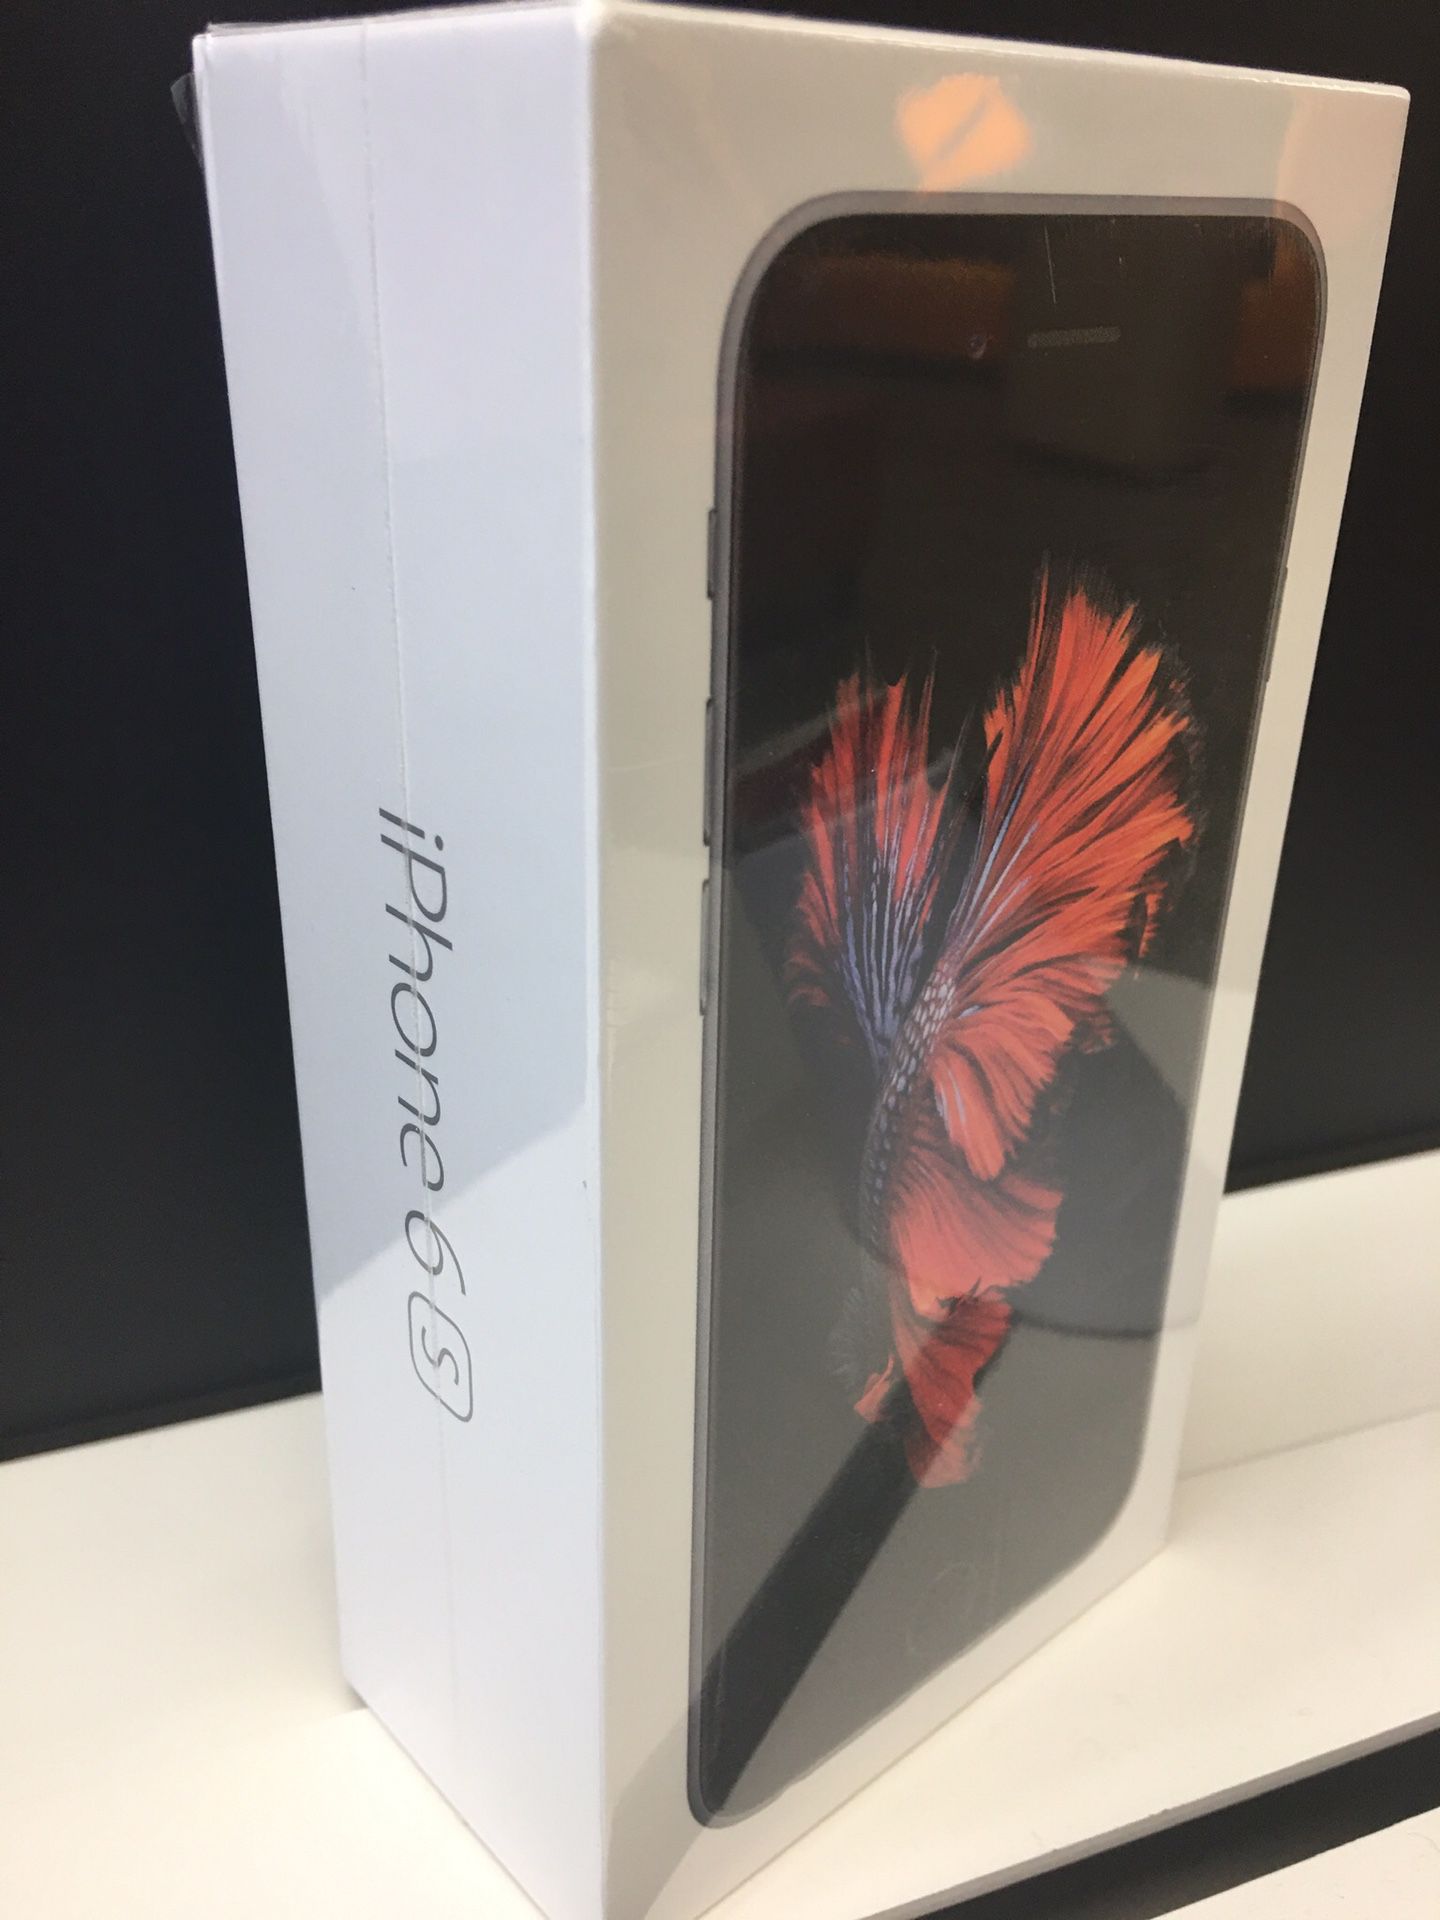 Iphone 6S 32GB for Boost Mobile